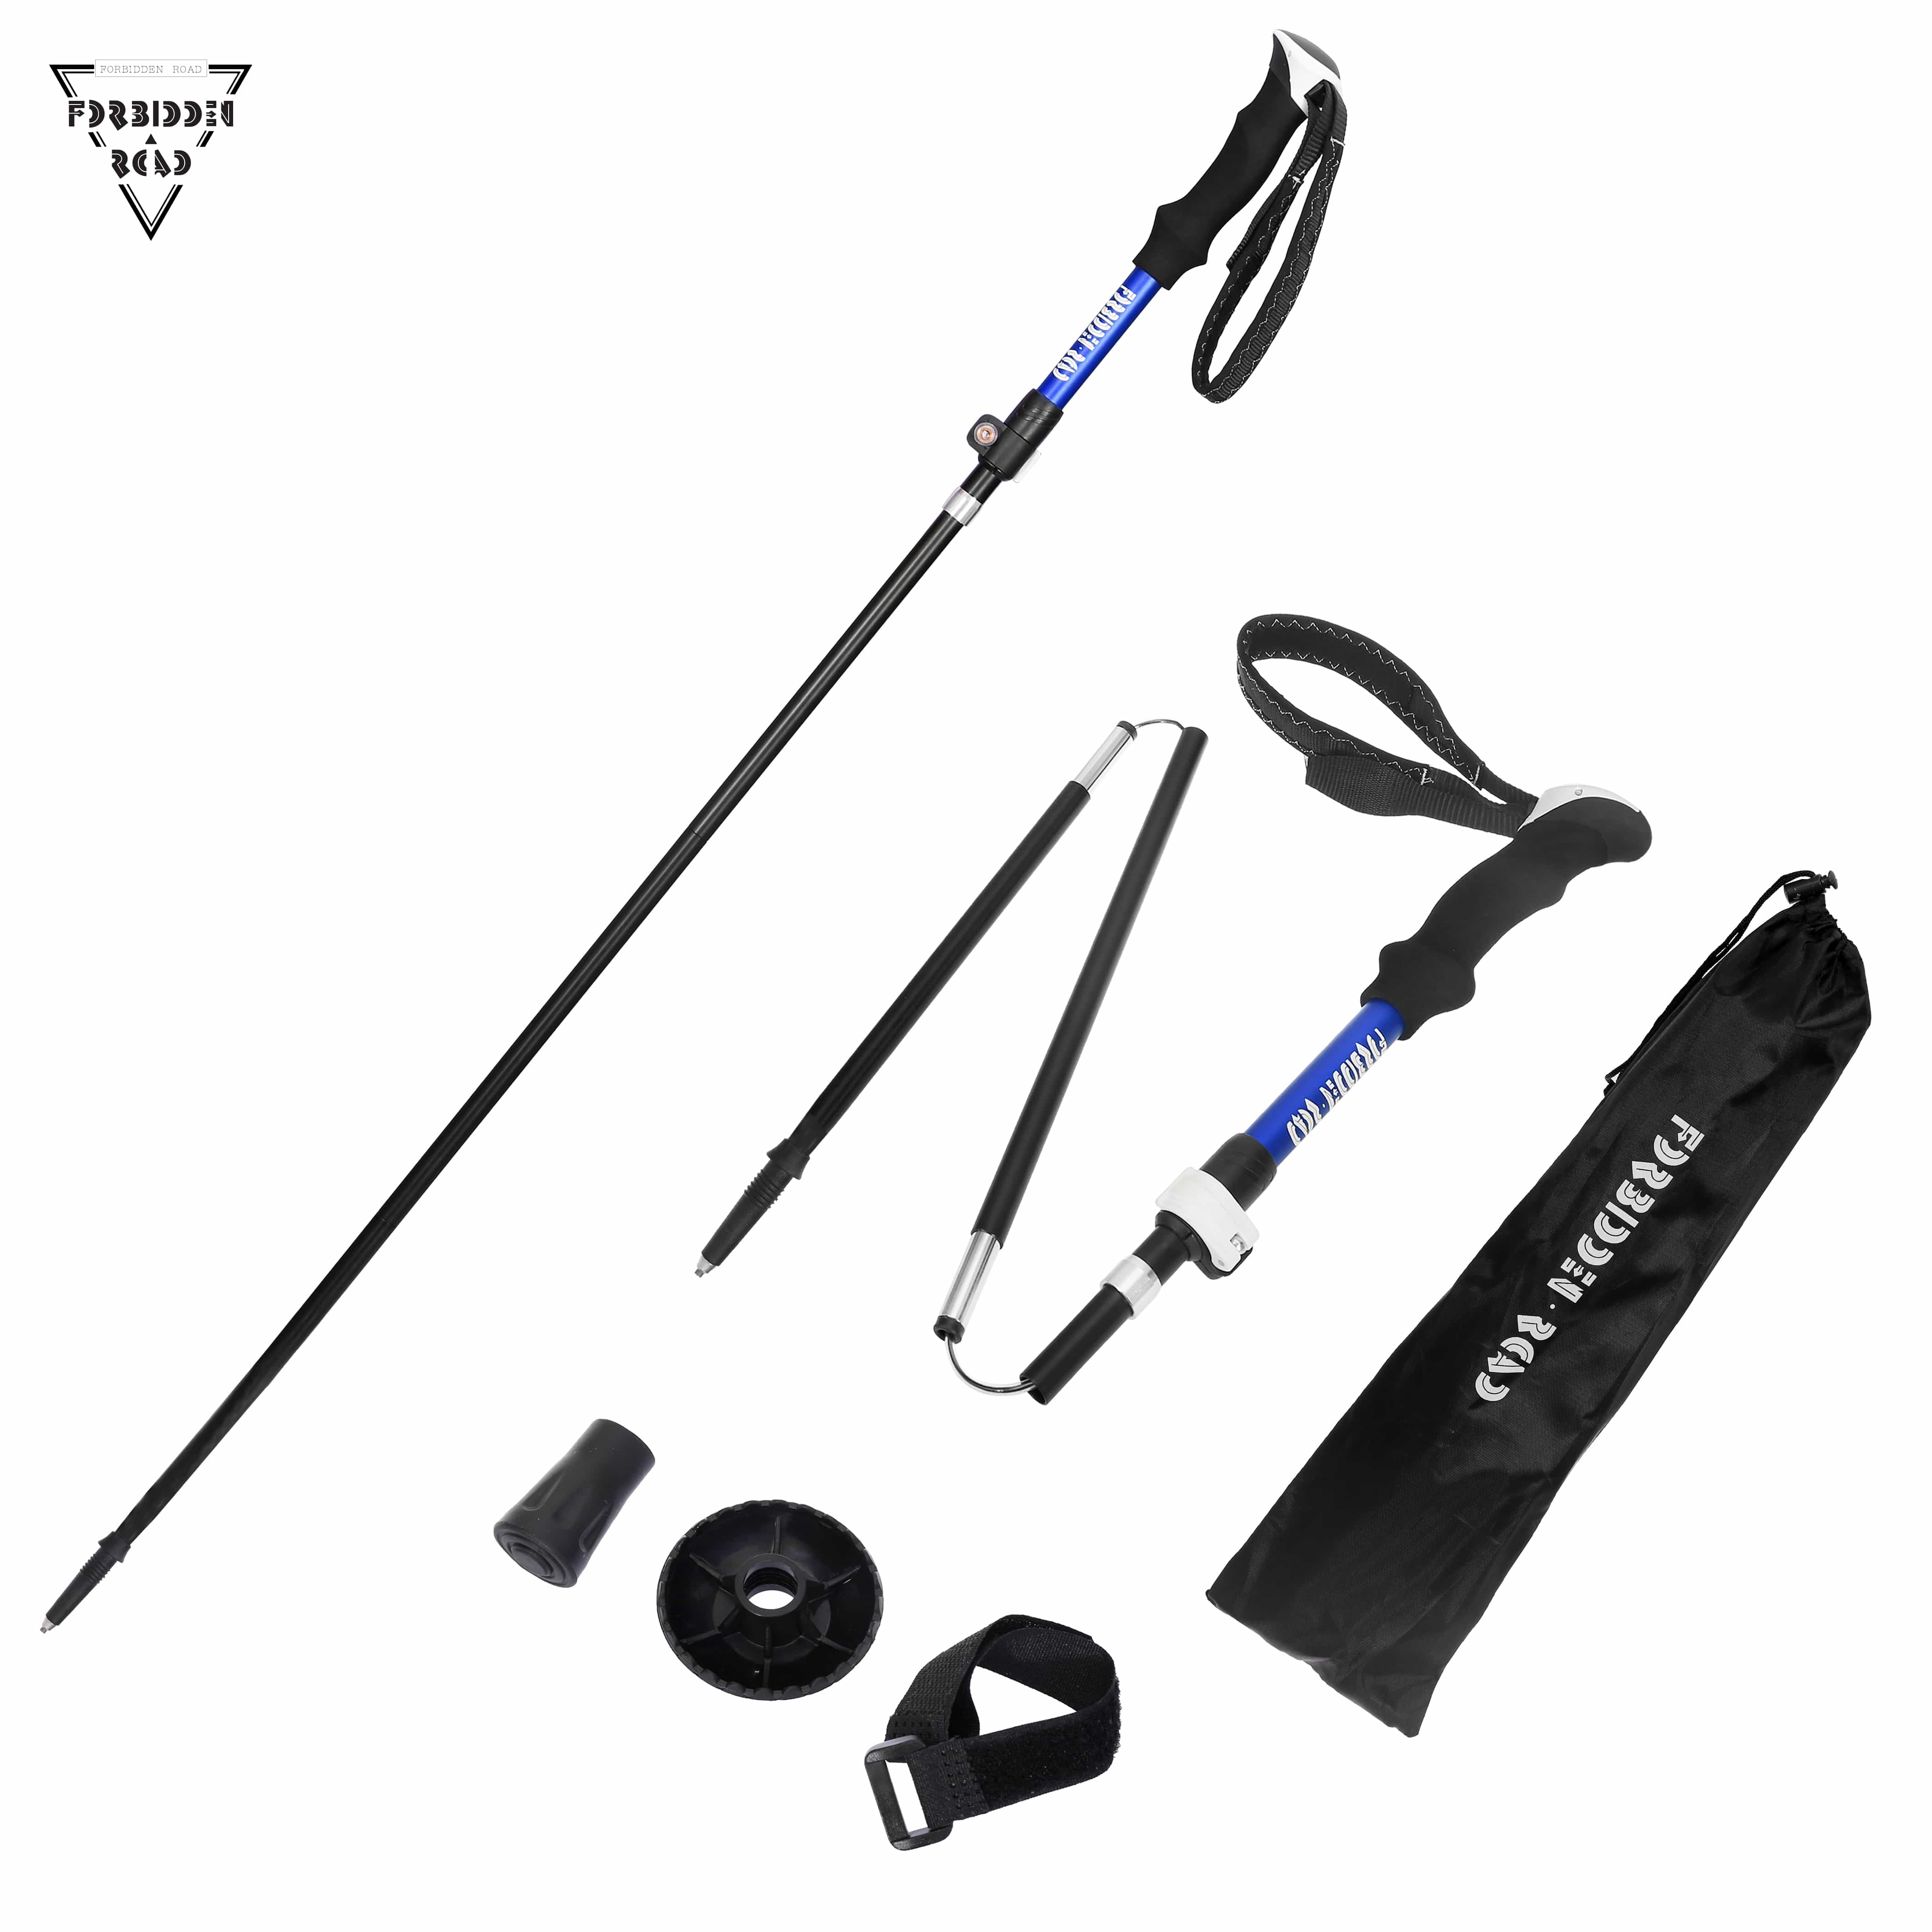 collapsible hiking pole